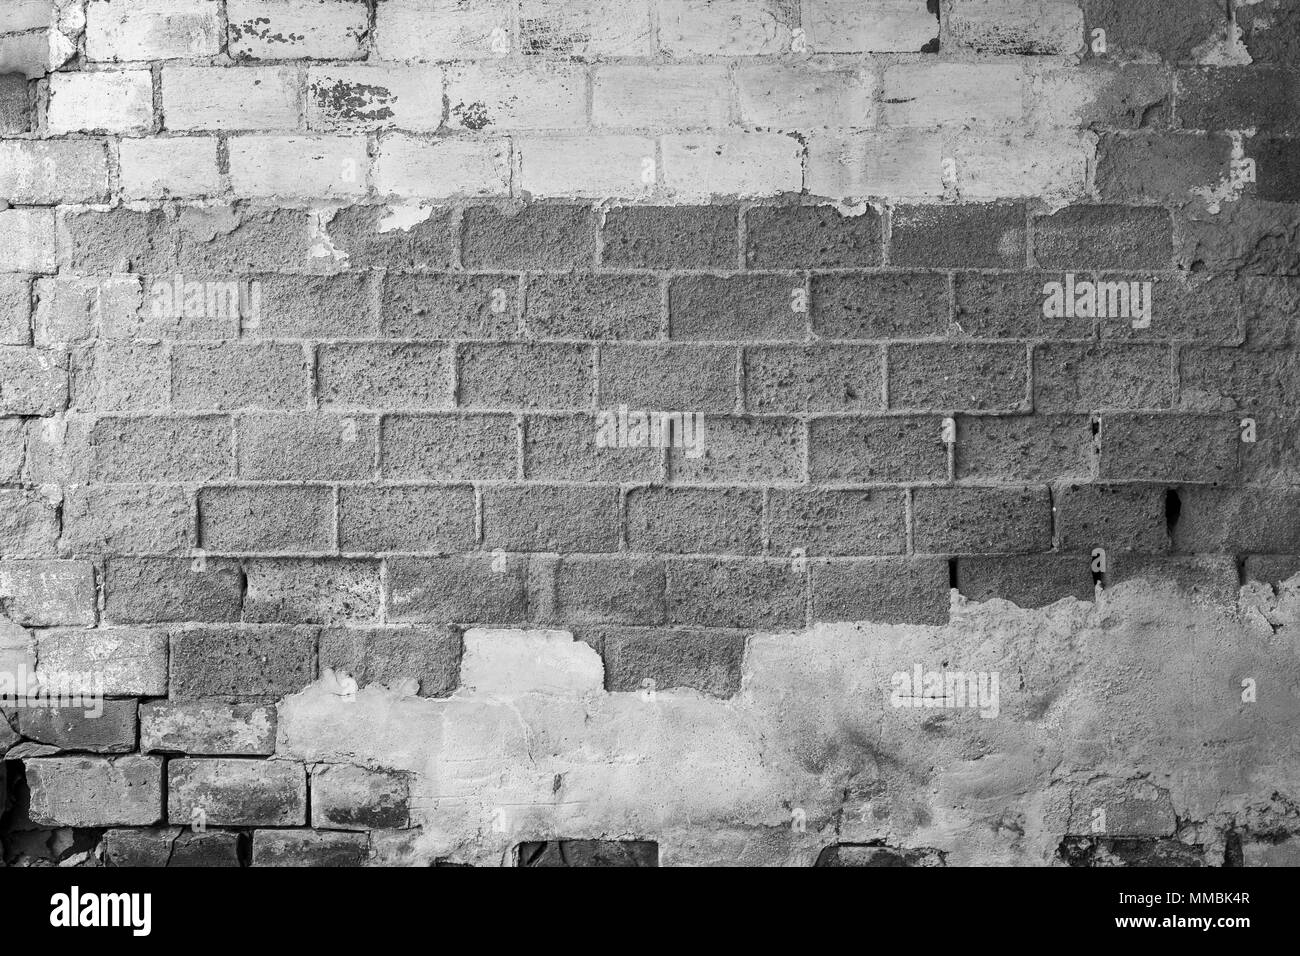 Full frame background of old and rough concrete block wall which is partly plastered or painted. Copy space. Black and white. Stock Photo